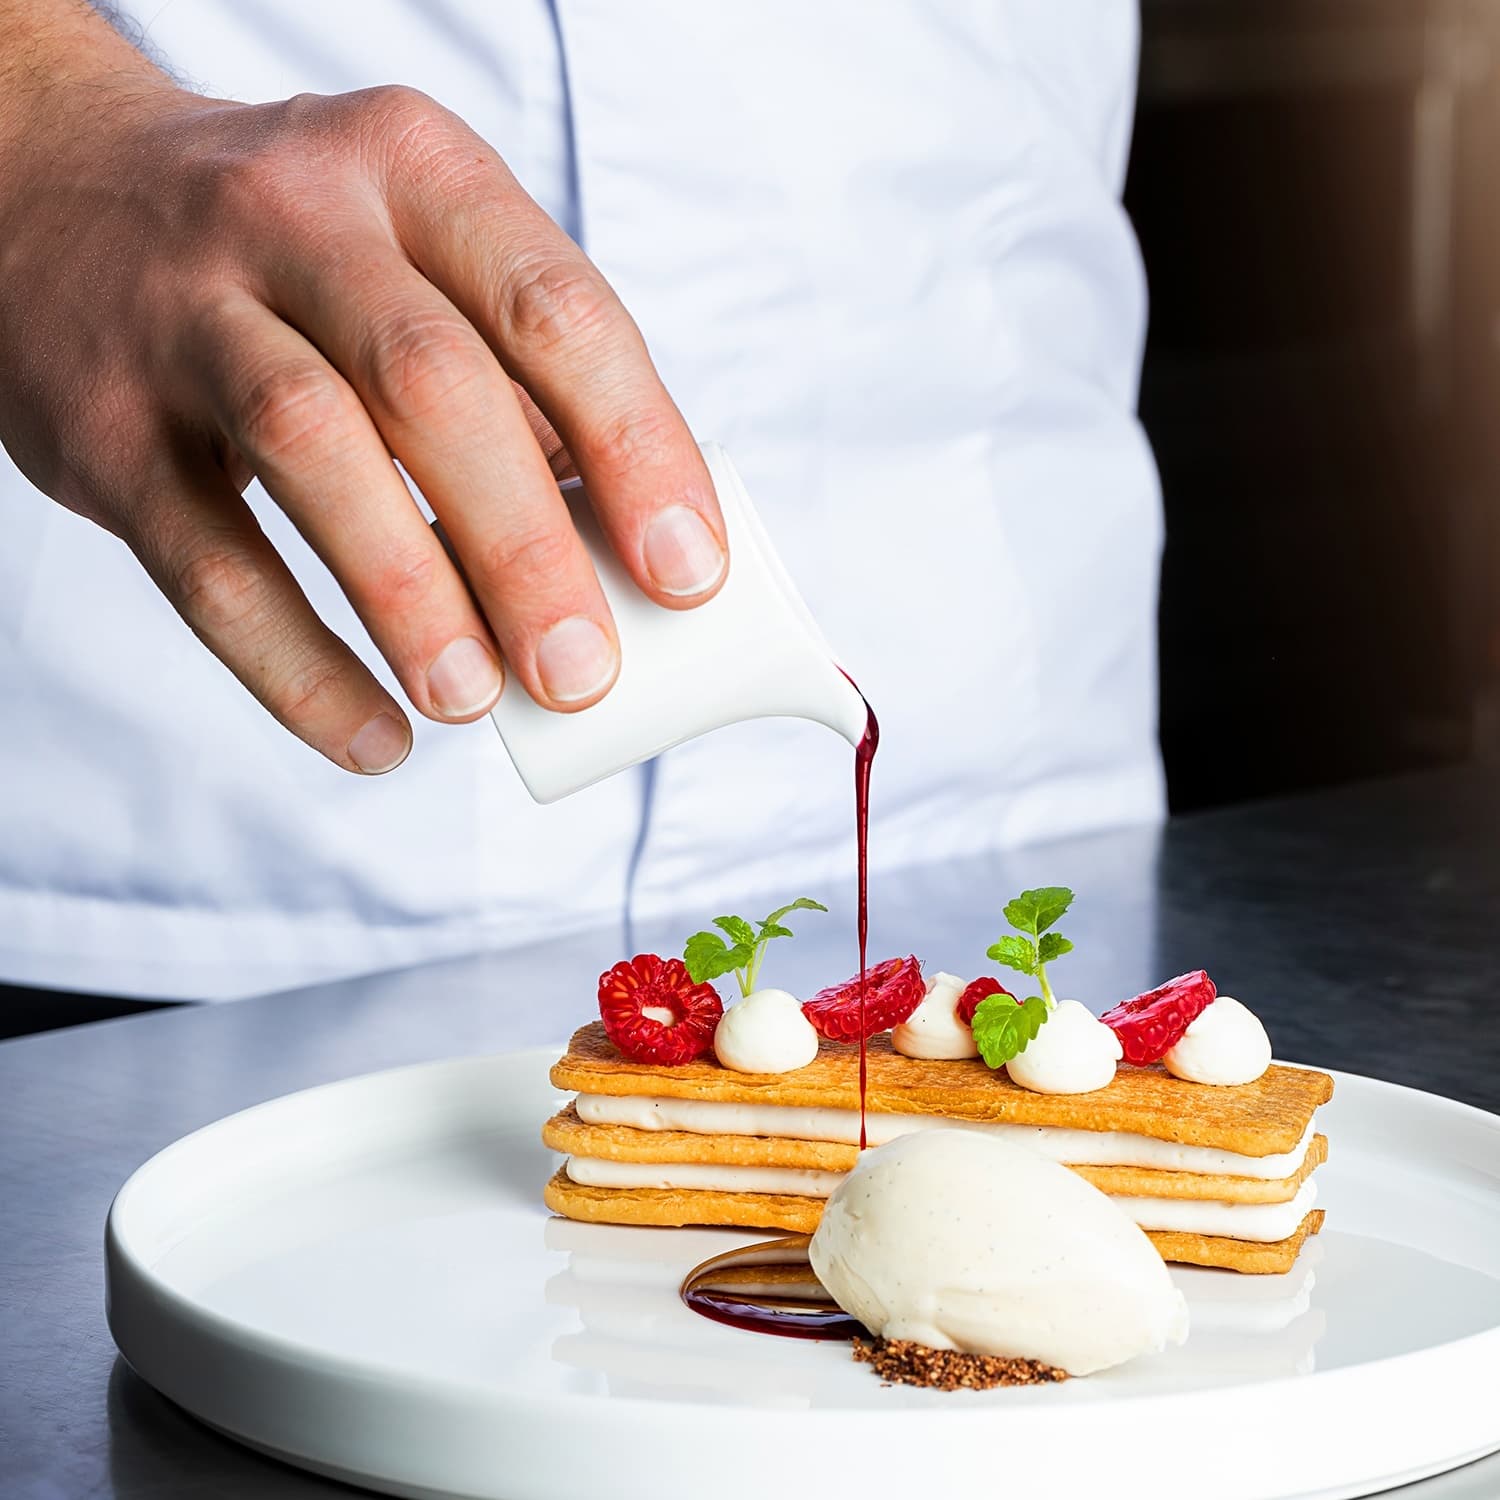 Patissier pours raspberry juice on a dessert at 5 star luxury hotel Cologne 